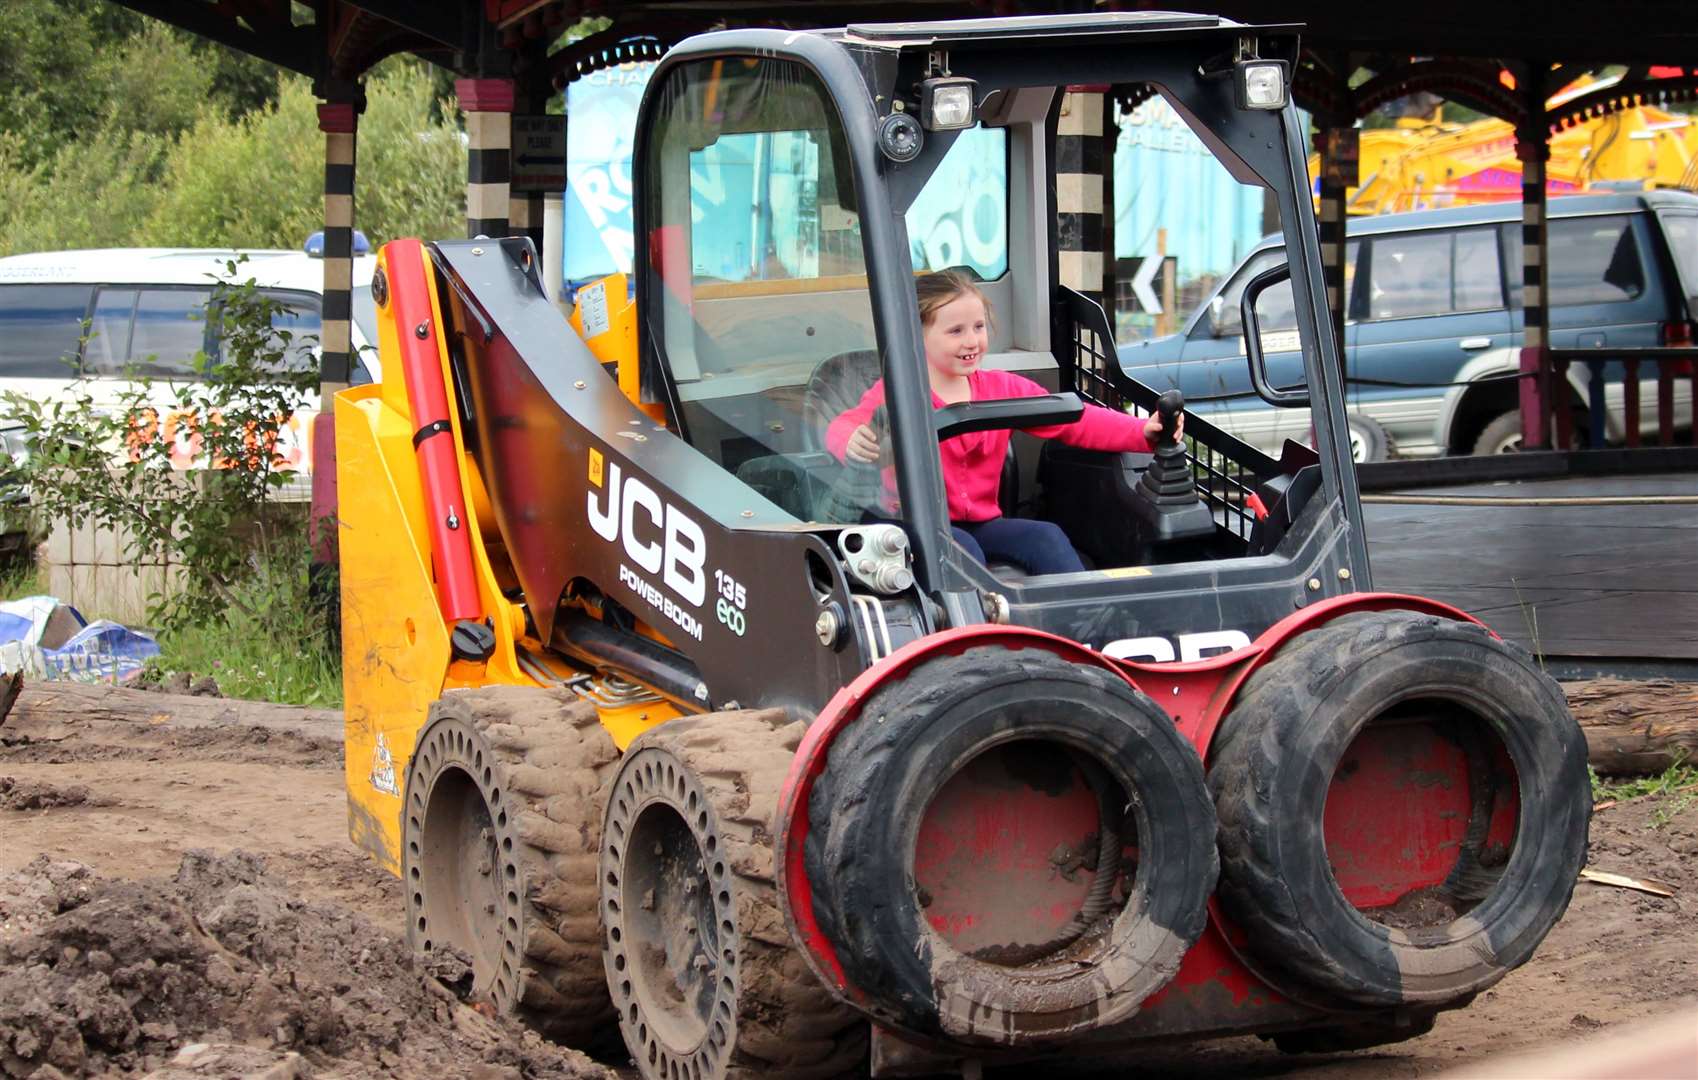 Diggerland offers discounts when tickets are booked in advance online